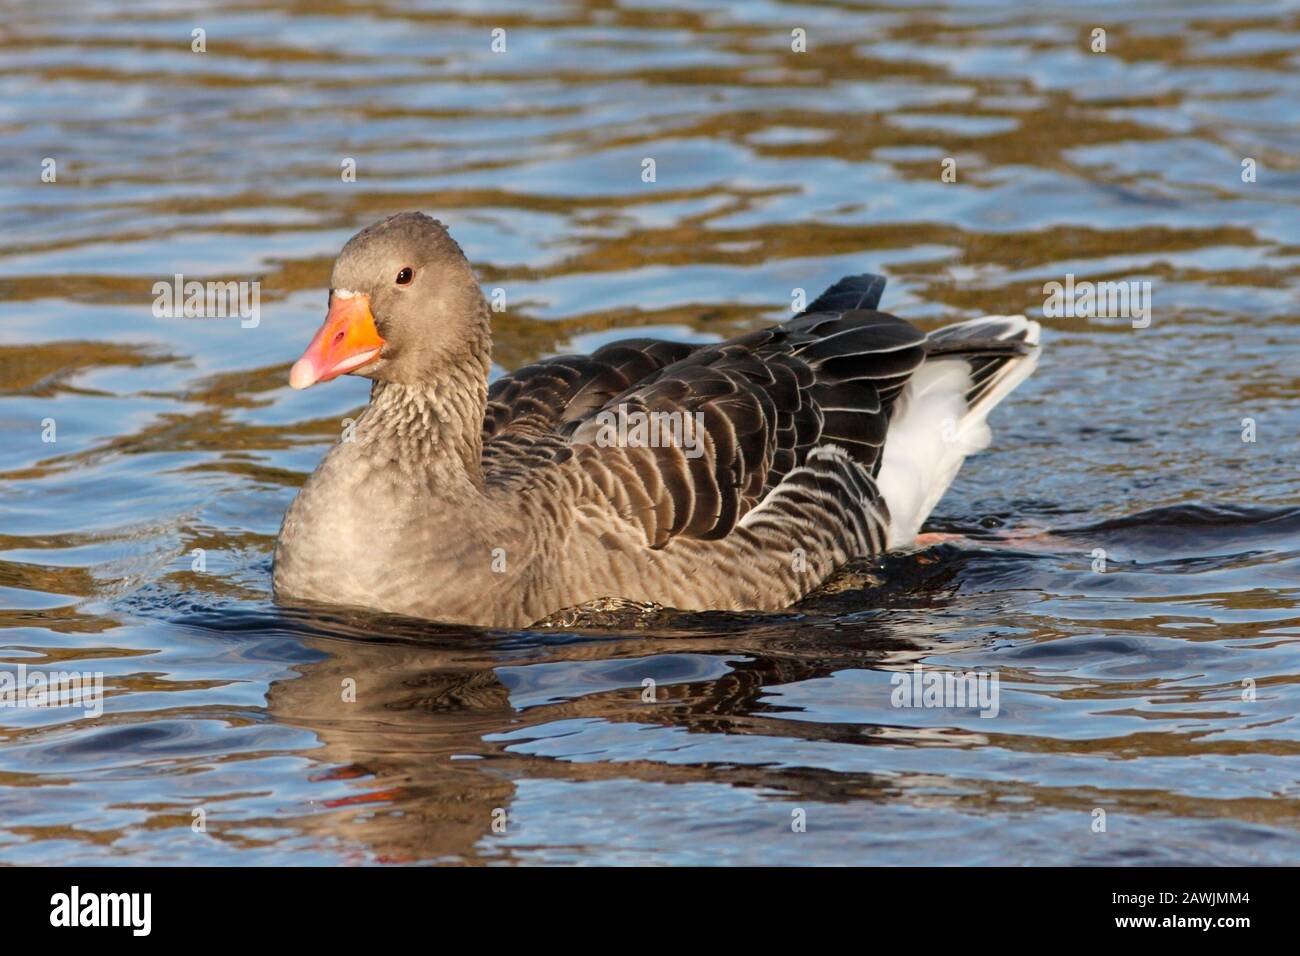 GREYLAG GOOSE (Anser anser) swimming in a river. Stock Photo